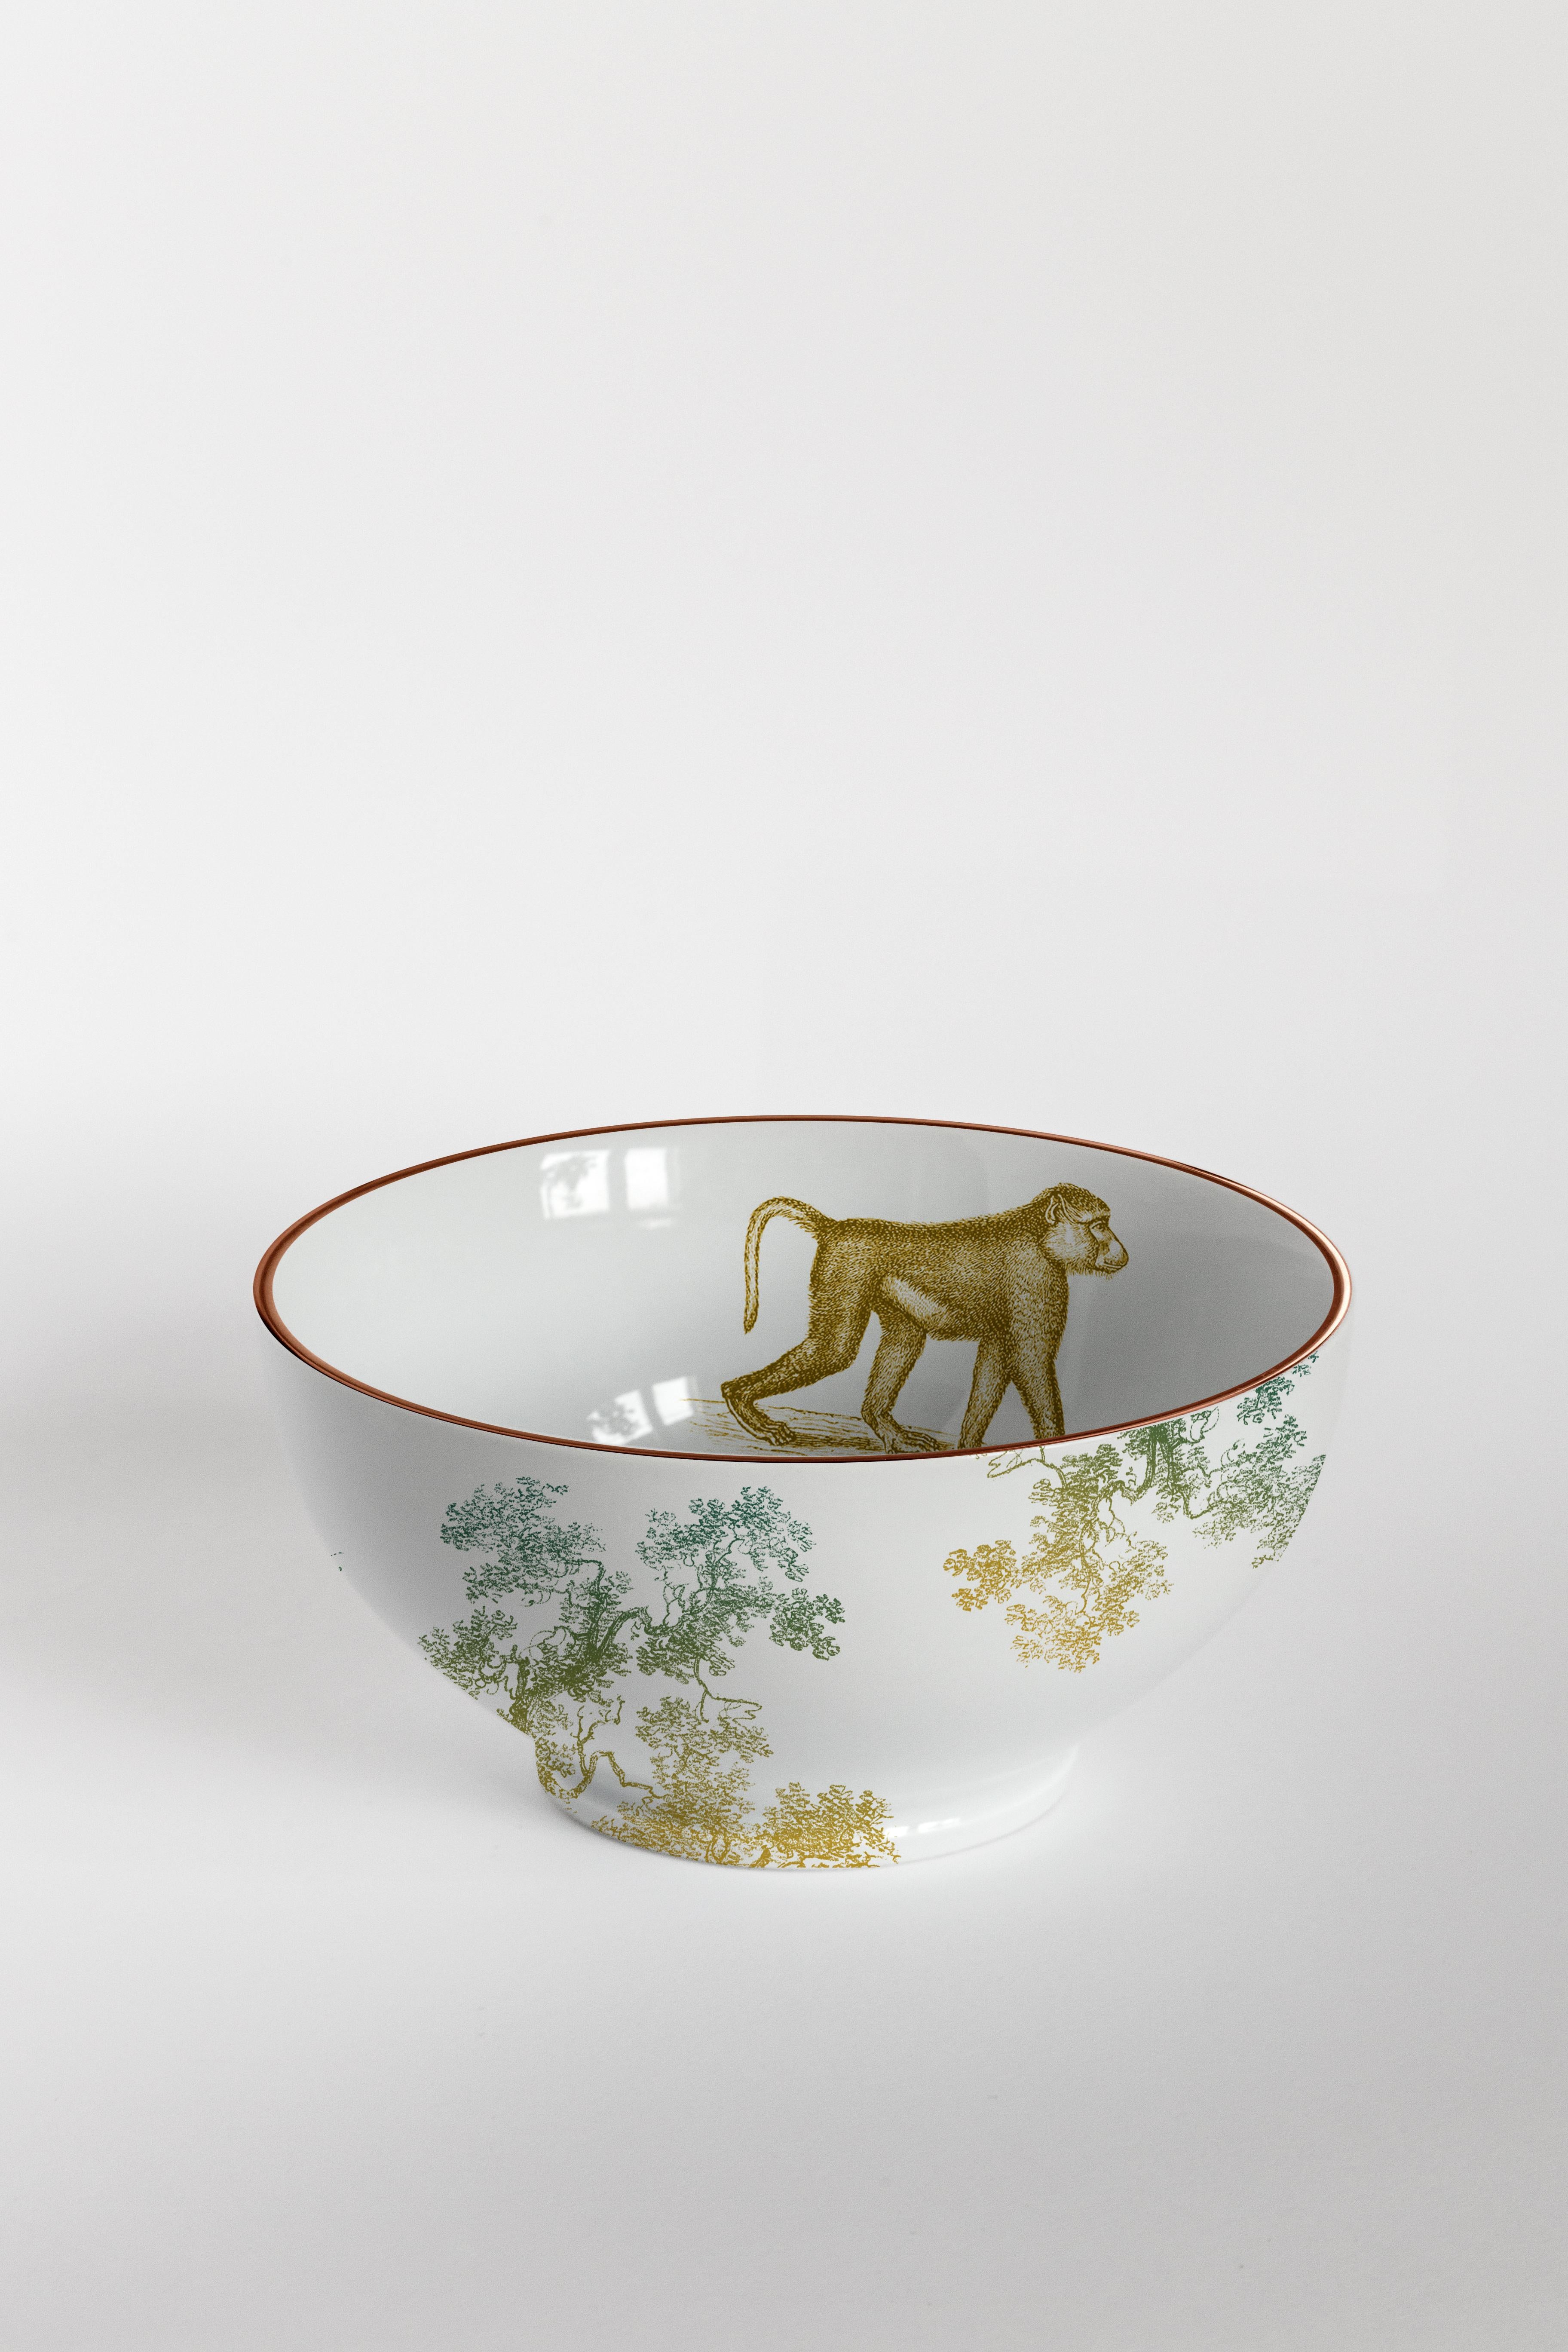 In the vicinity of a Buddhist temple, the slow and cyclical flow of time is outlined.
The Galtaji collection tells an Indian astronomical garden, where monkeys populate the branches of the trees in their daily activities. Everything is shrouded in